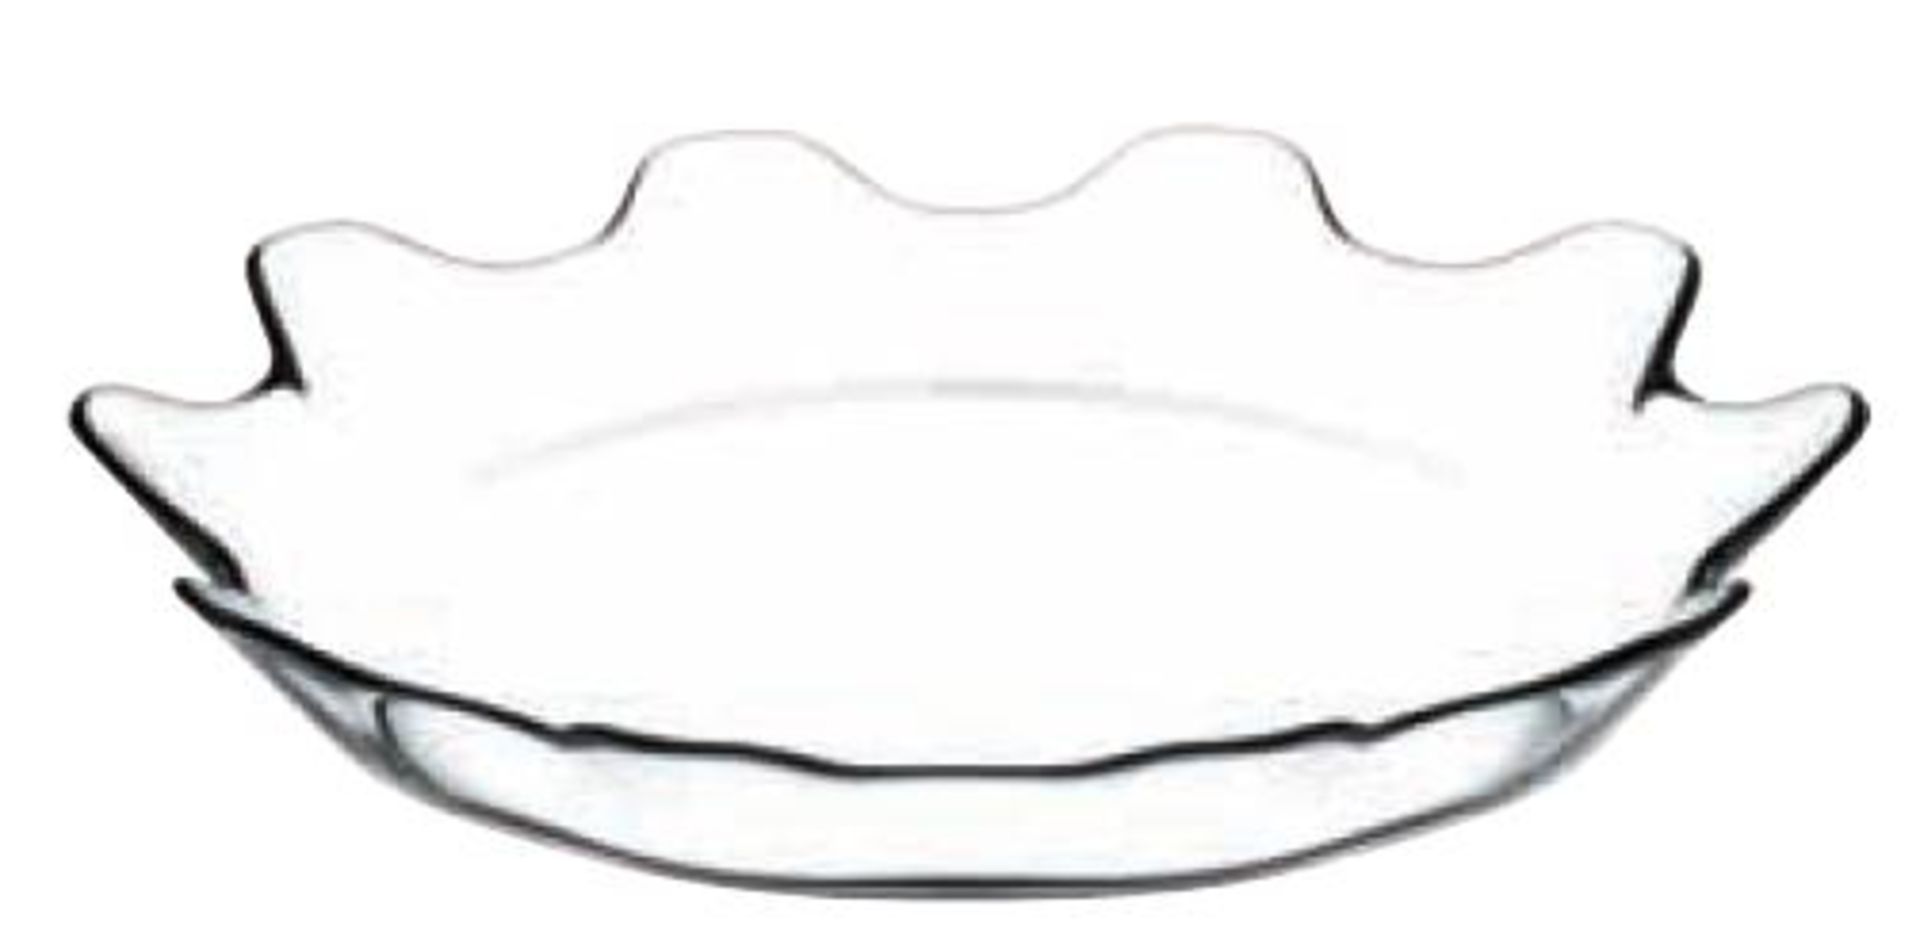 V Brand New Patisserie Round Service Plate X 2 YOUR BID PRICE TO BE MULTIPLIED BY TWO